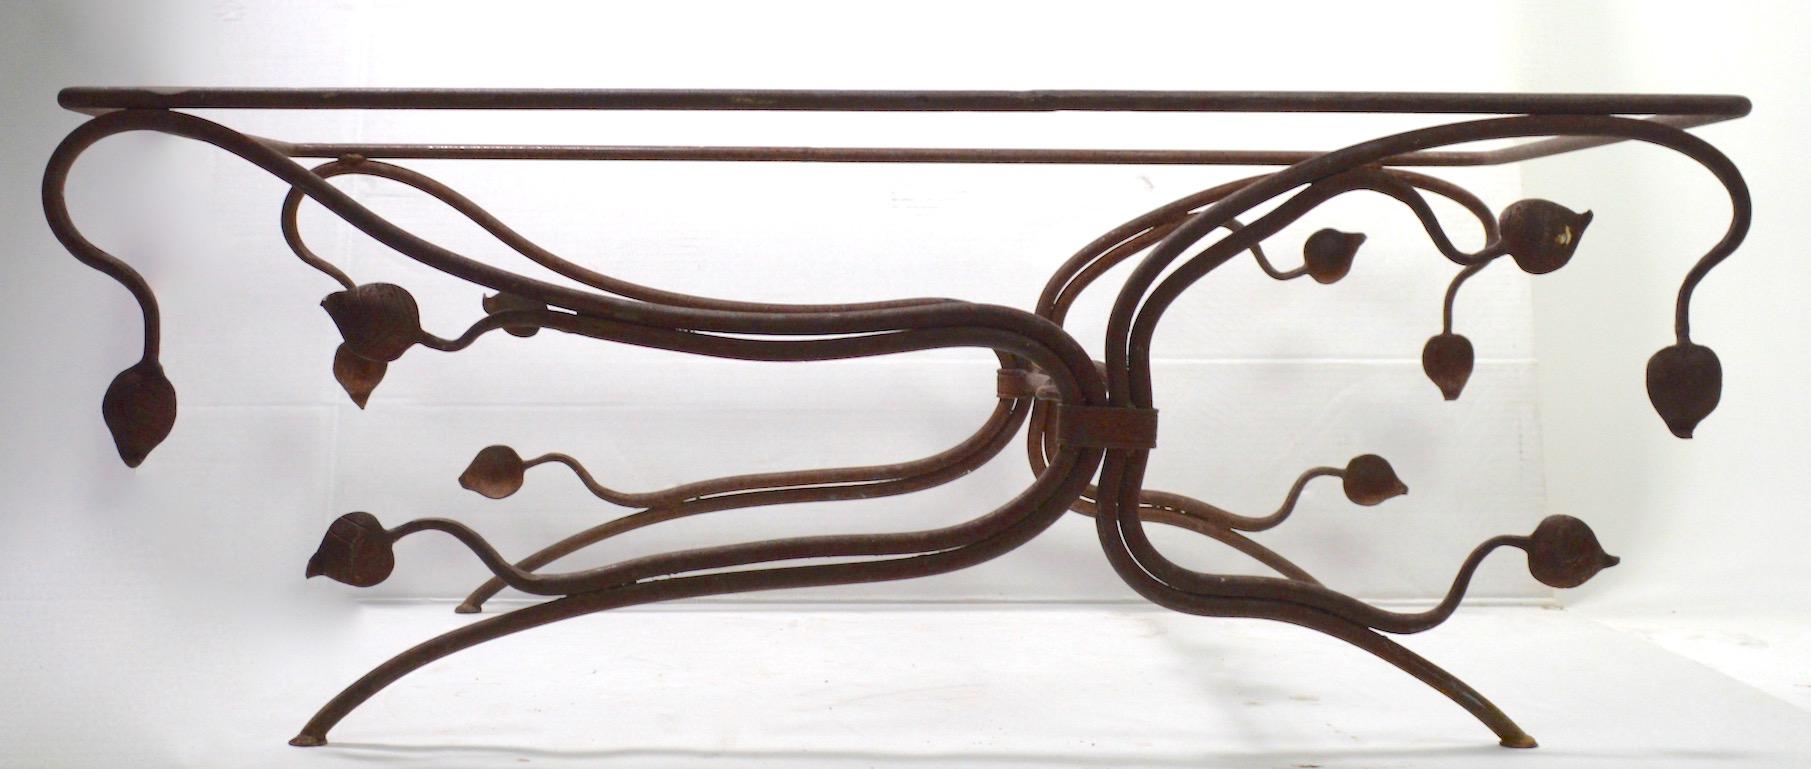 Whimsical stylized foliate wrought iron coffee table. Probably the best iron work we have seen in a long time, very high quality metalwork, unusual form, with great surface rust patina. Originally this table probably had a glass top, we do not